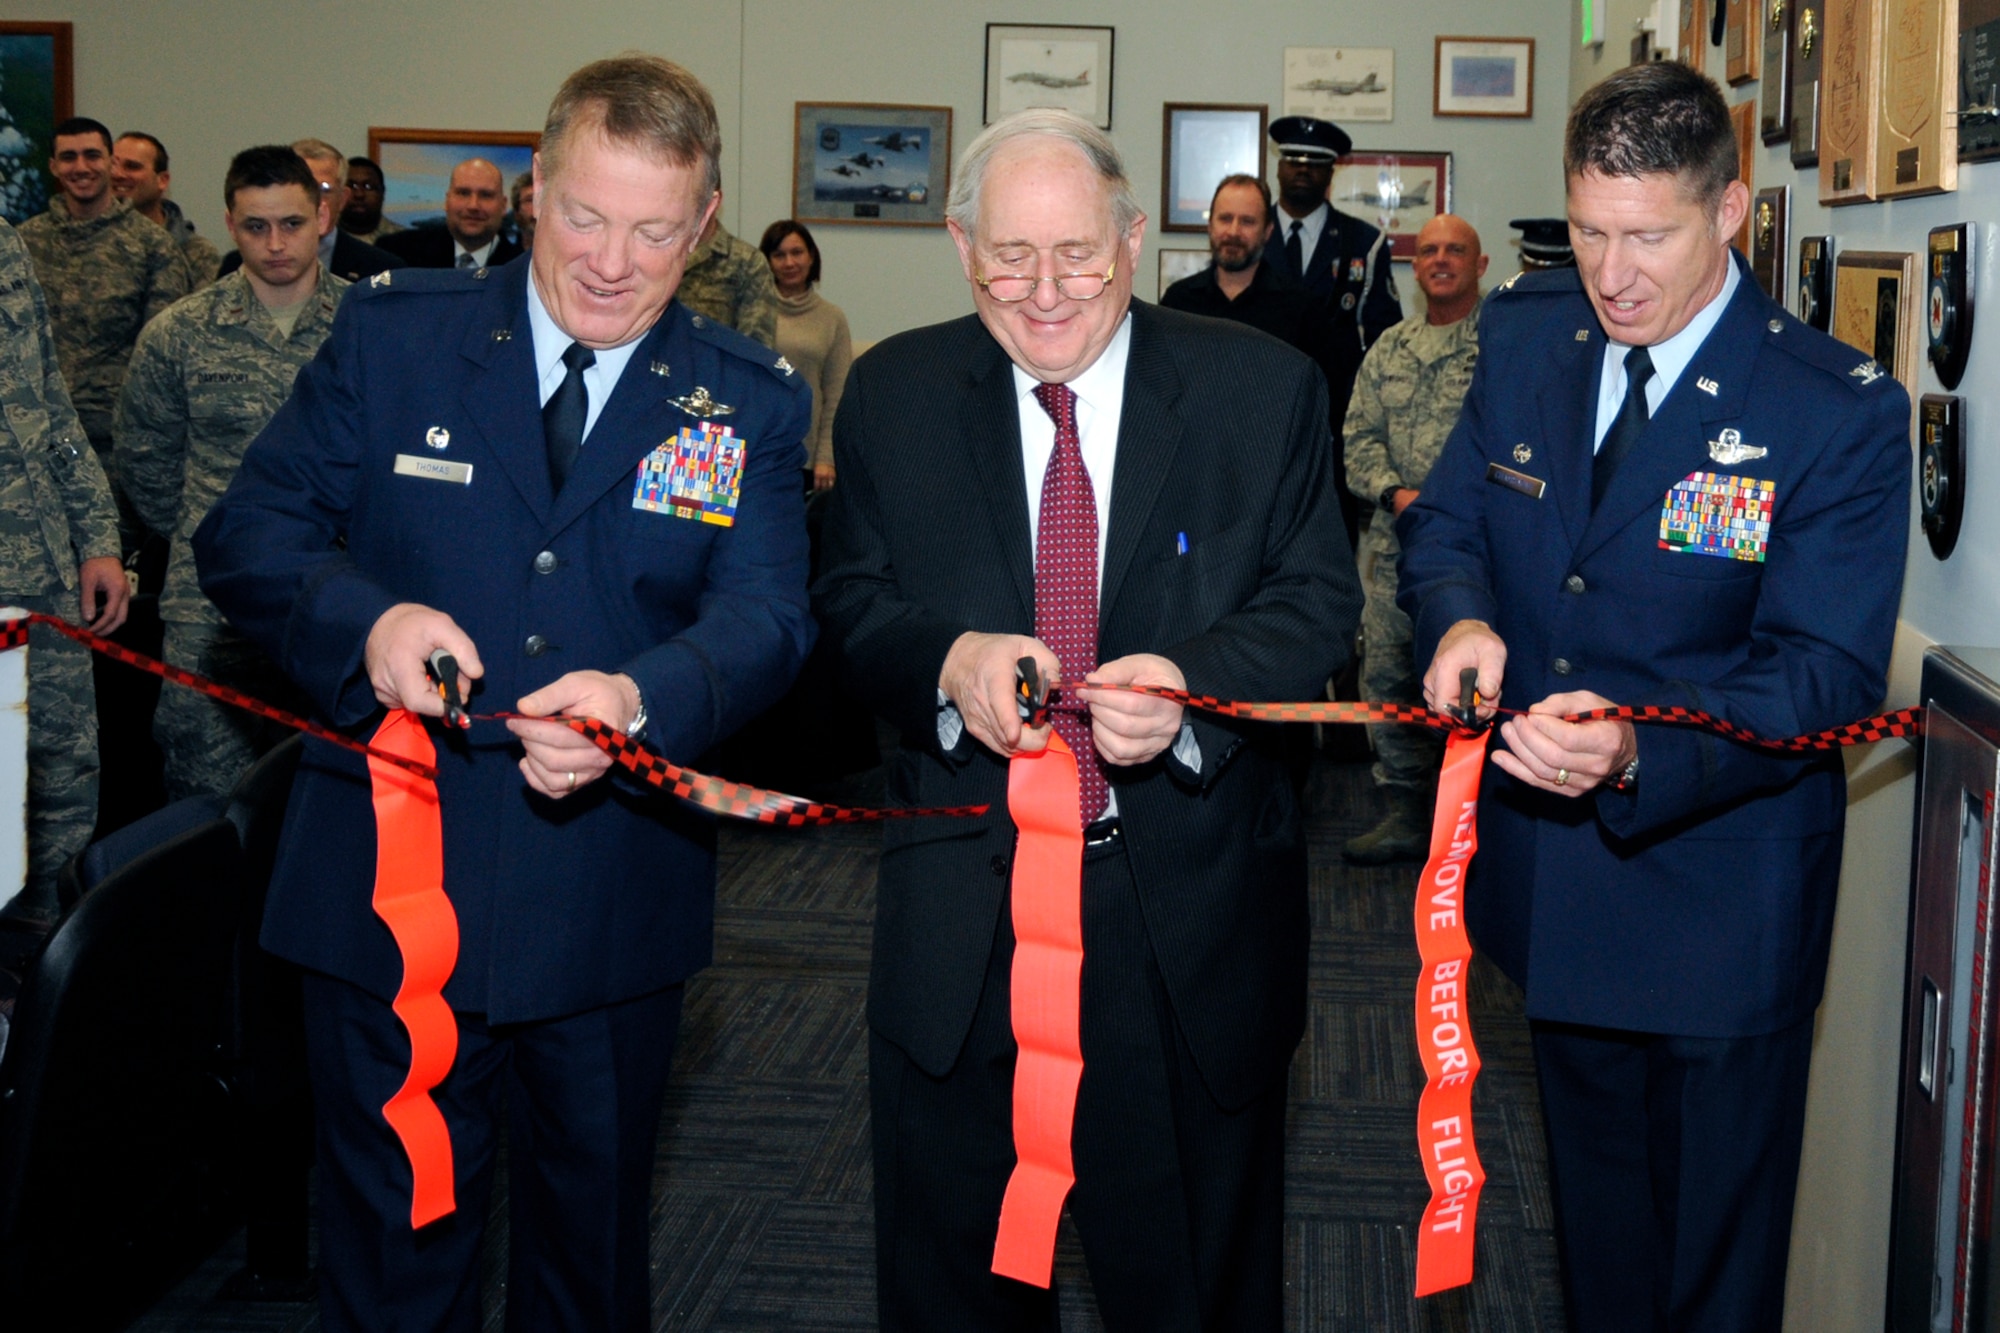 (from left to right) Colonel Michael T. Thomas, 127th Wing commander, Senator Carl Levin, and Colonel Douglas Champagne, 127th Operations Group commander, cut the ribbon to the entrance of the new Operations Group facility at a ceremony held on February 22 at Selfridge Air National Guard Base, Mich. The new $6.6 million building hosts the Operations Group command staff, the 107th Fighter Squadron and the 127th Operations Support Flight.   (photo by John S. Swanson)